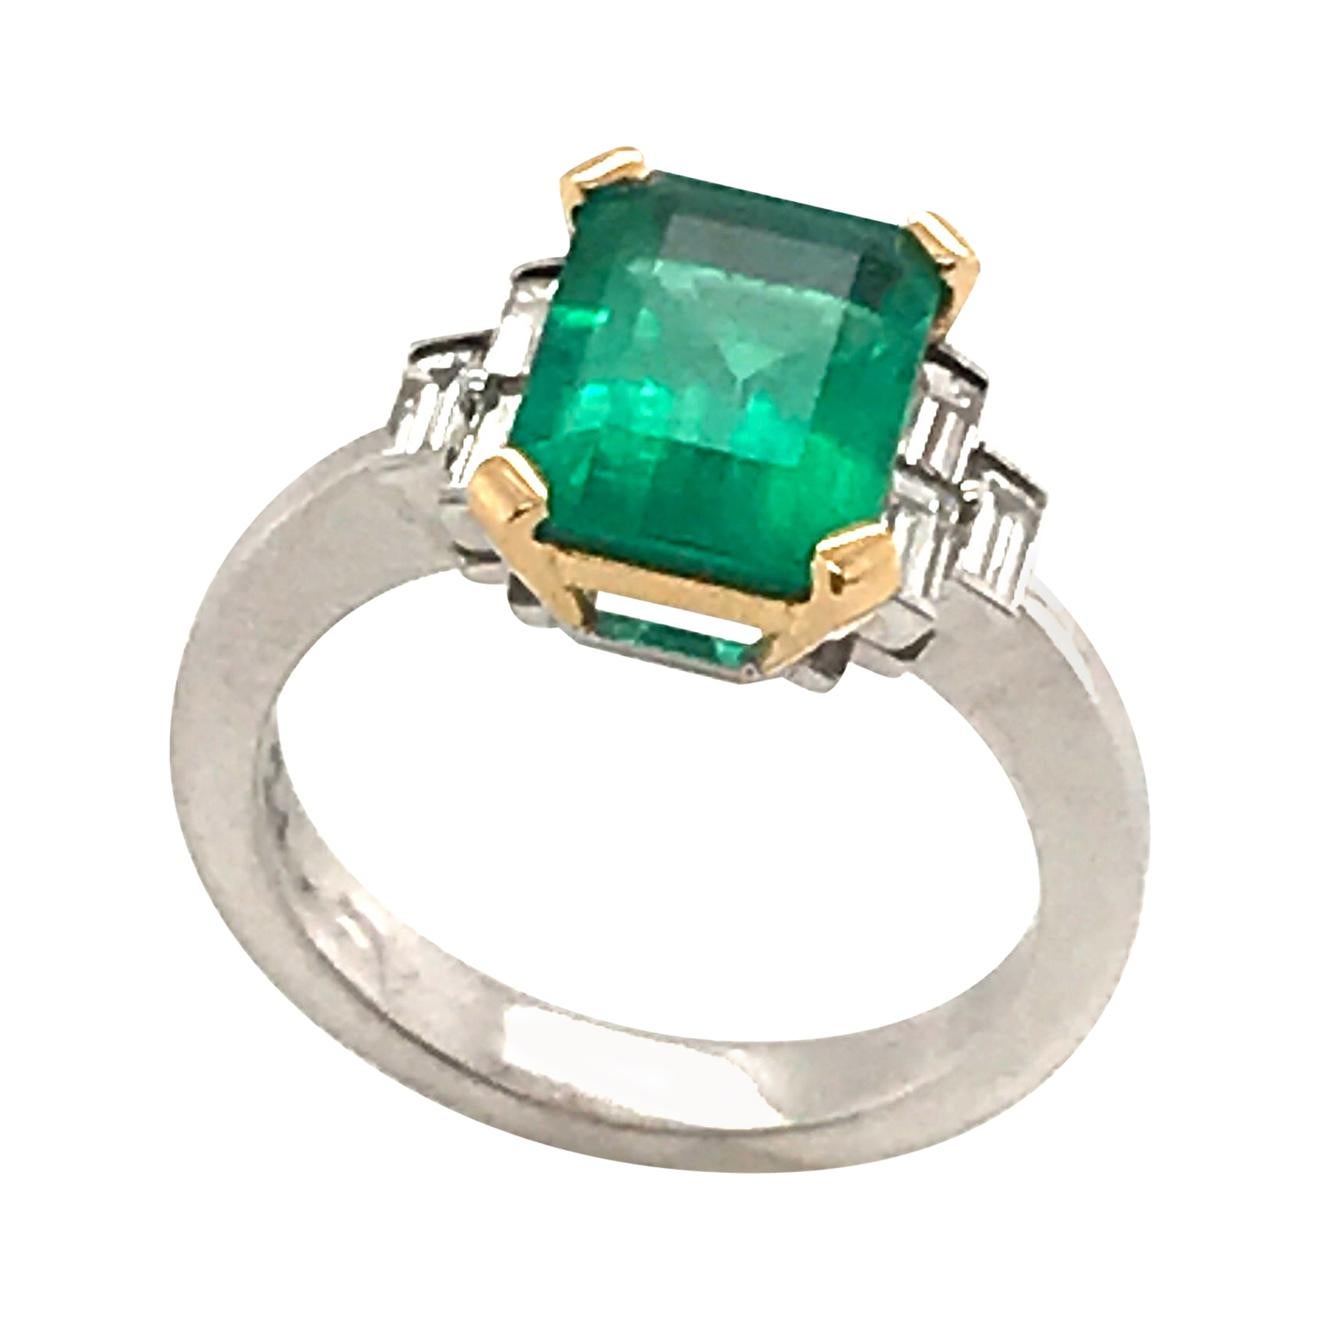 Certified Emerald 2.68 Karat White Diamonds on with Gold Engagement Ring